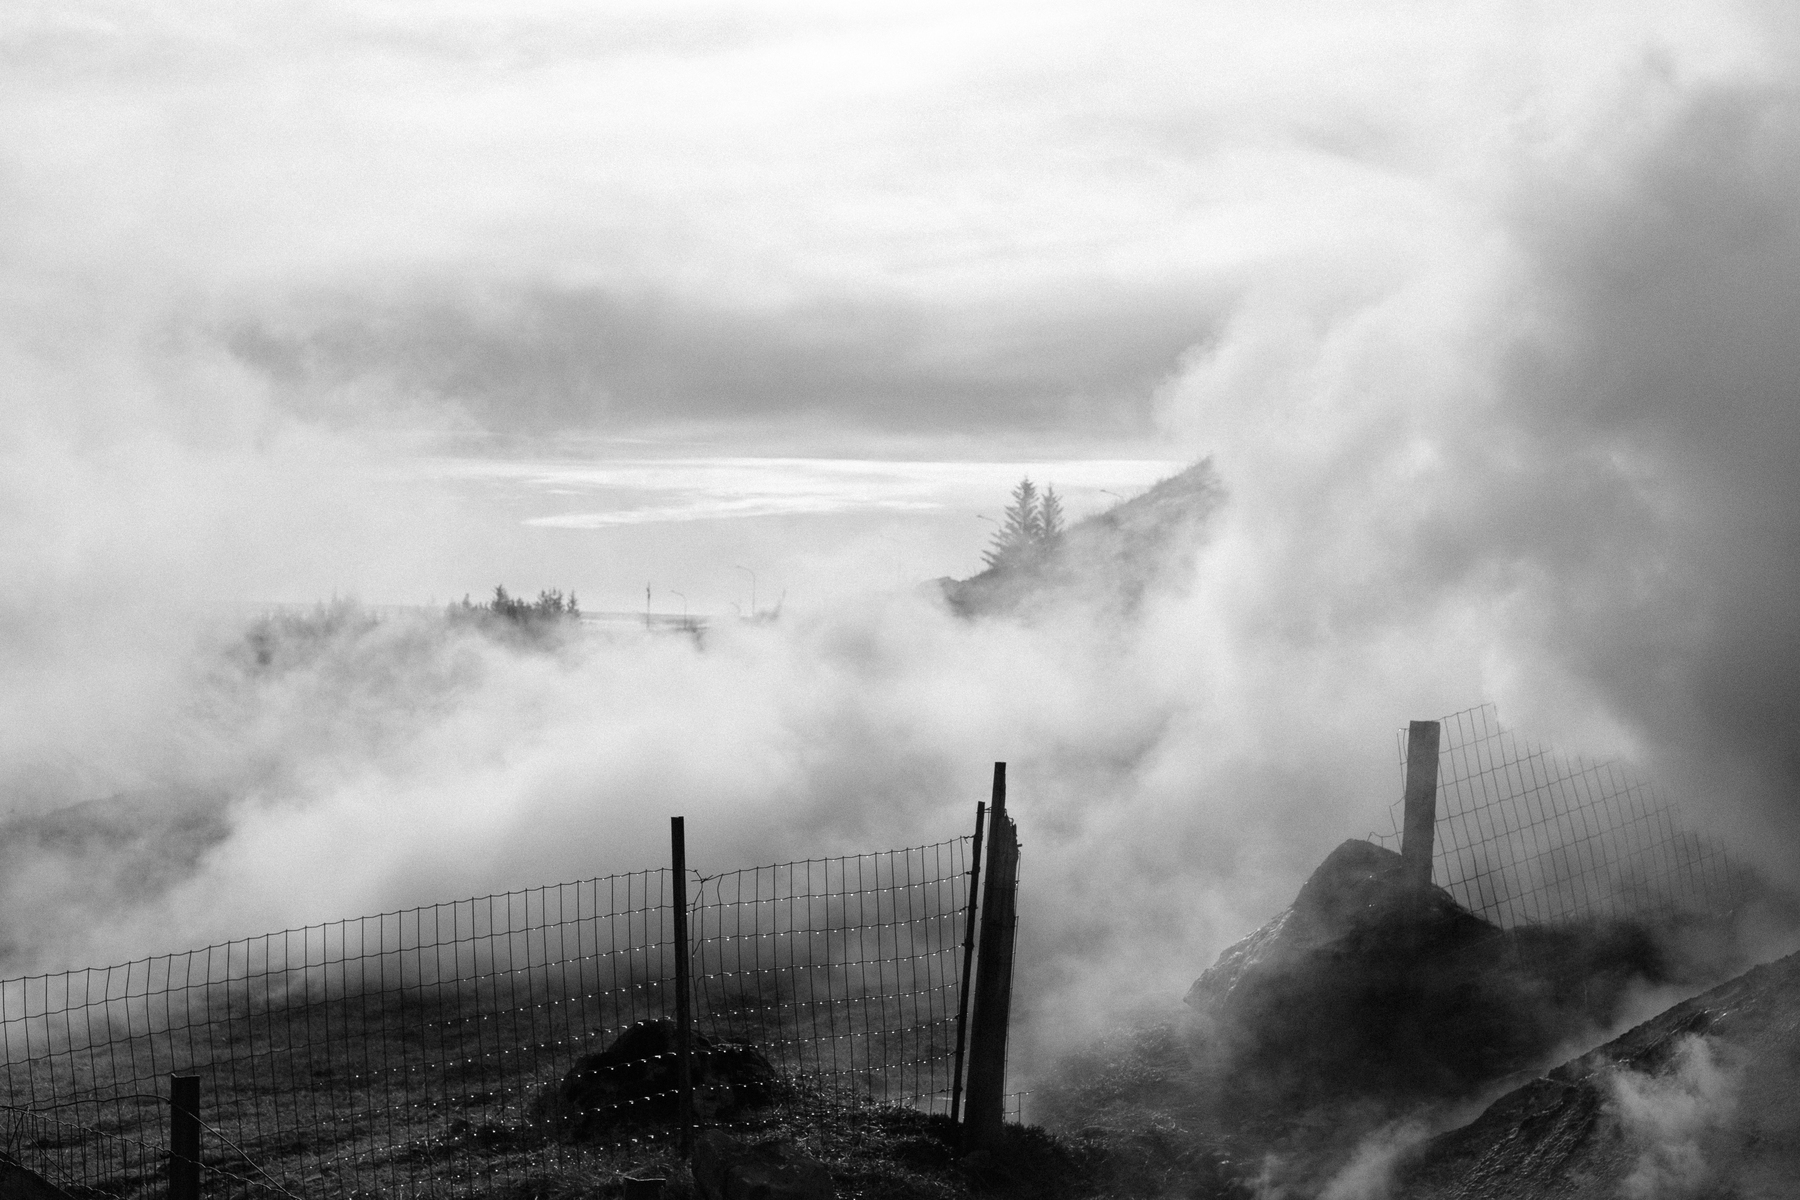 Same geothermal well. The cloud of steam hugs the landscape around.